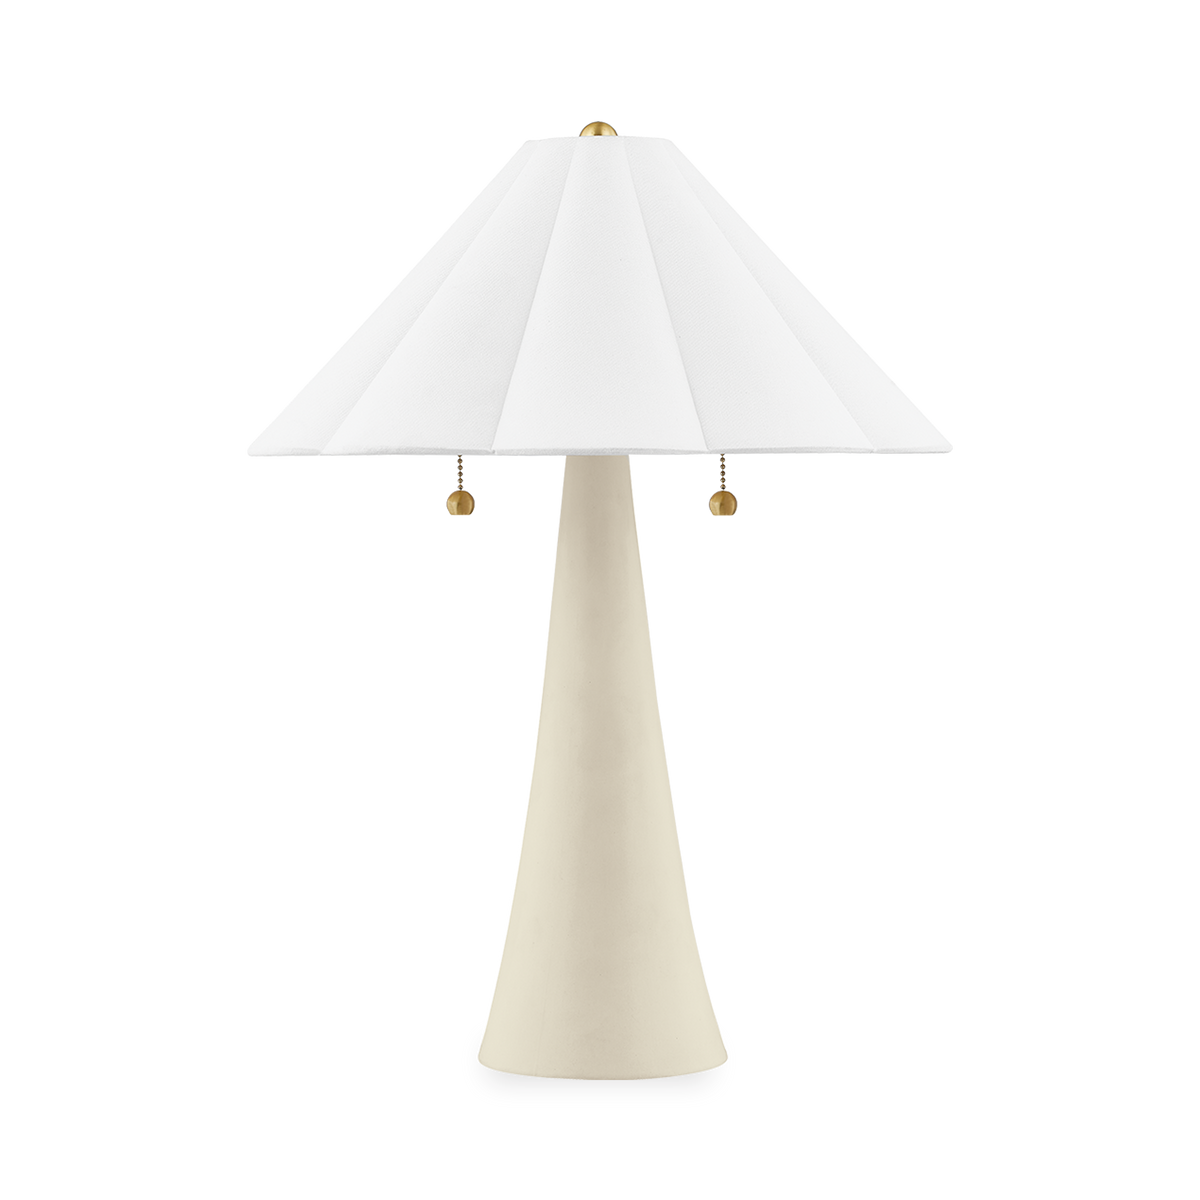 The Alana Table Lamp keeps things light and airy.